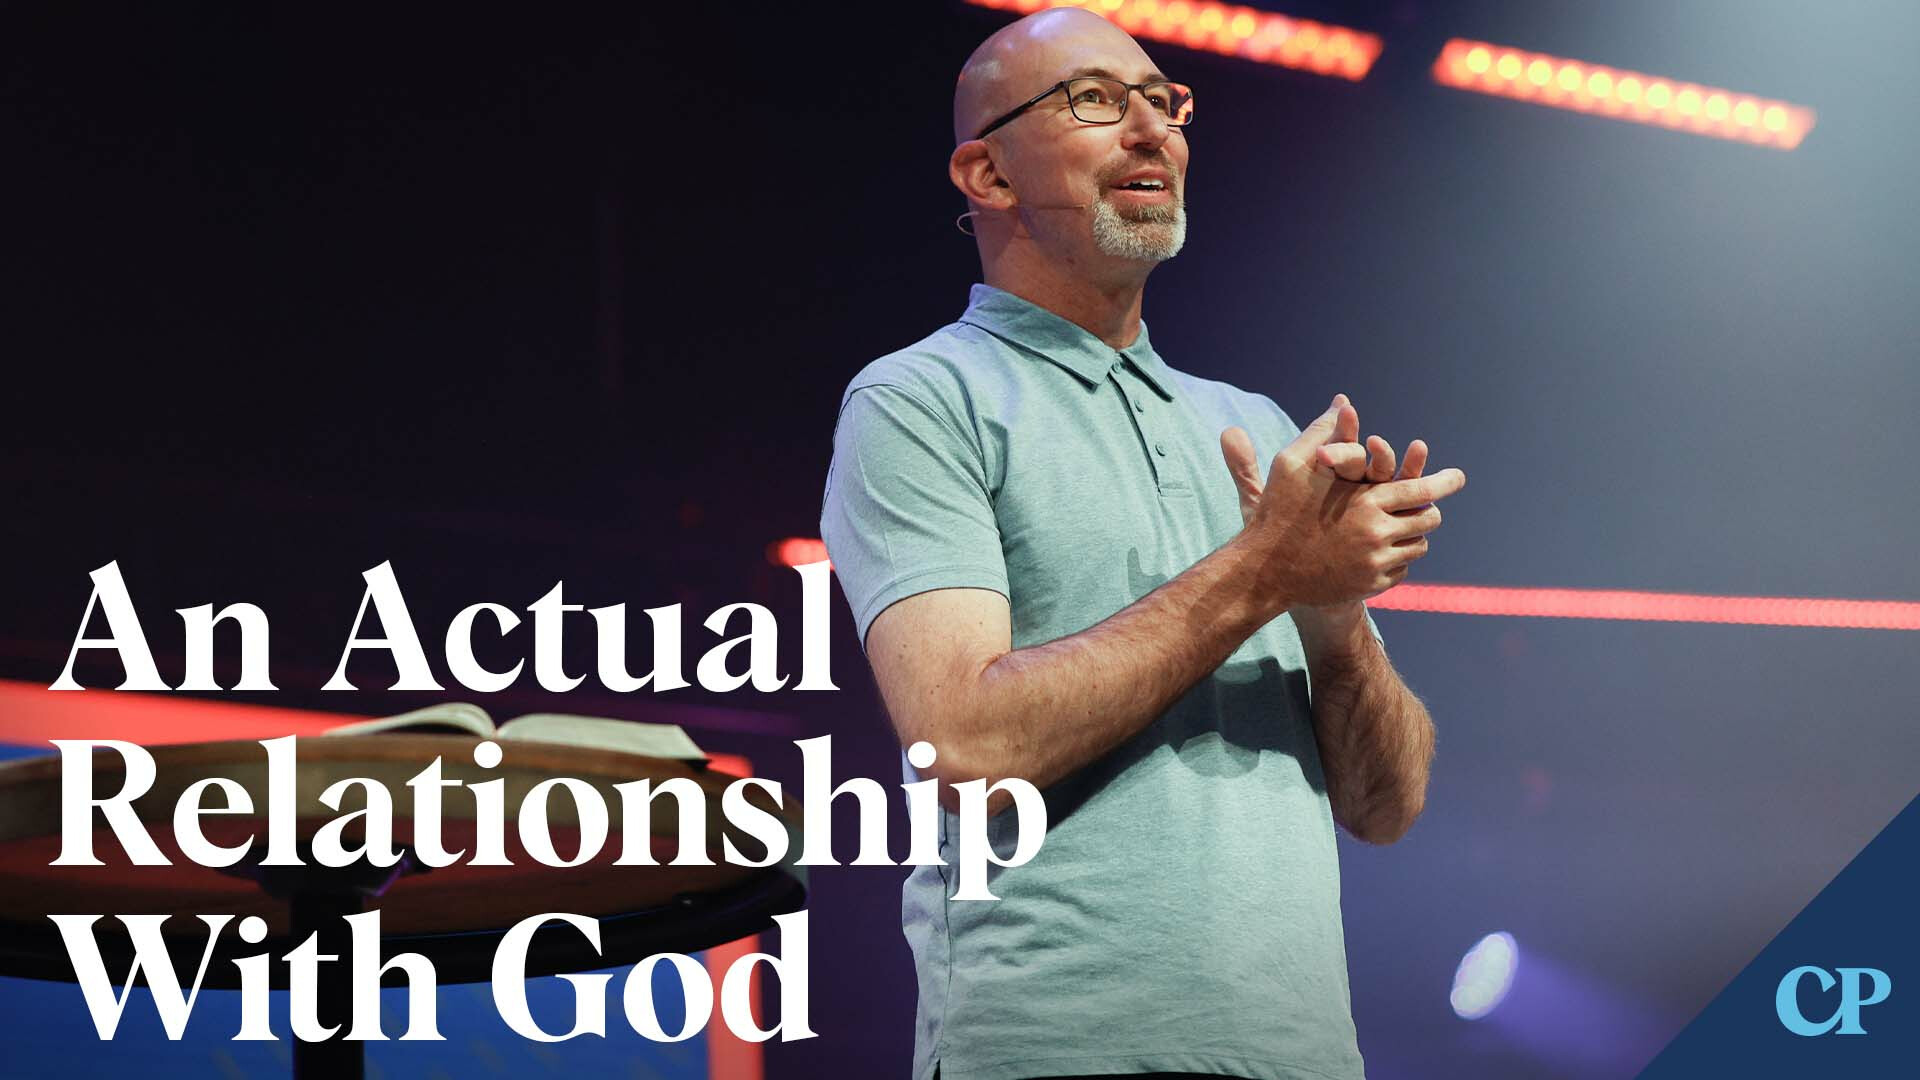 An Actual Relationship With God